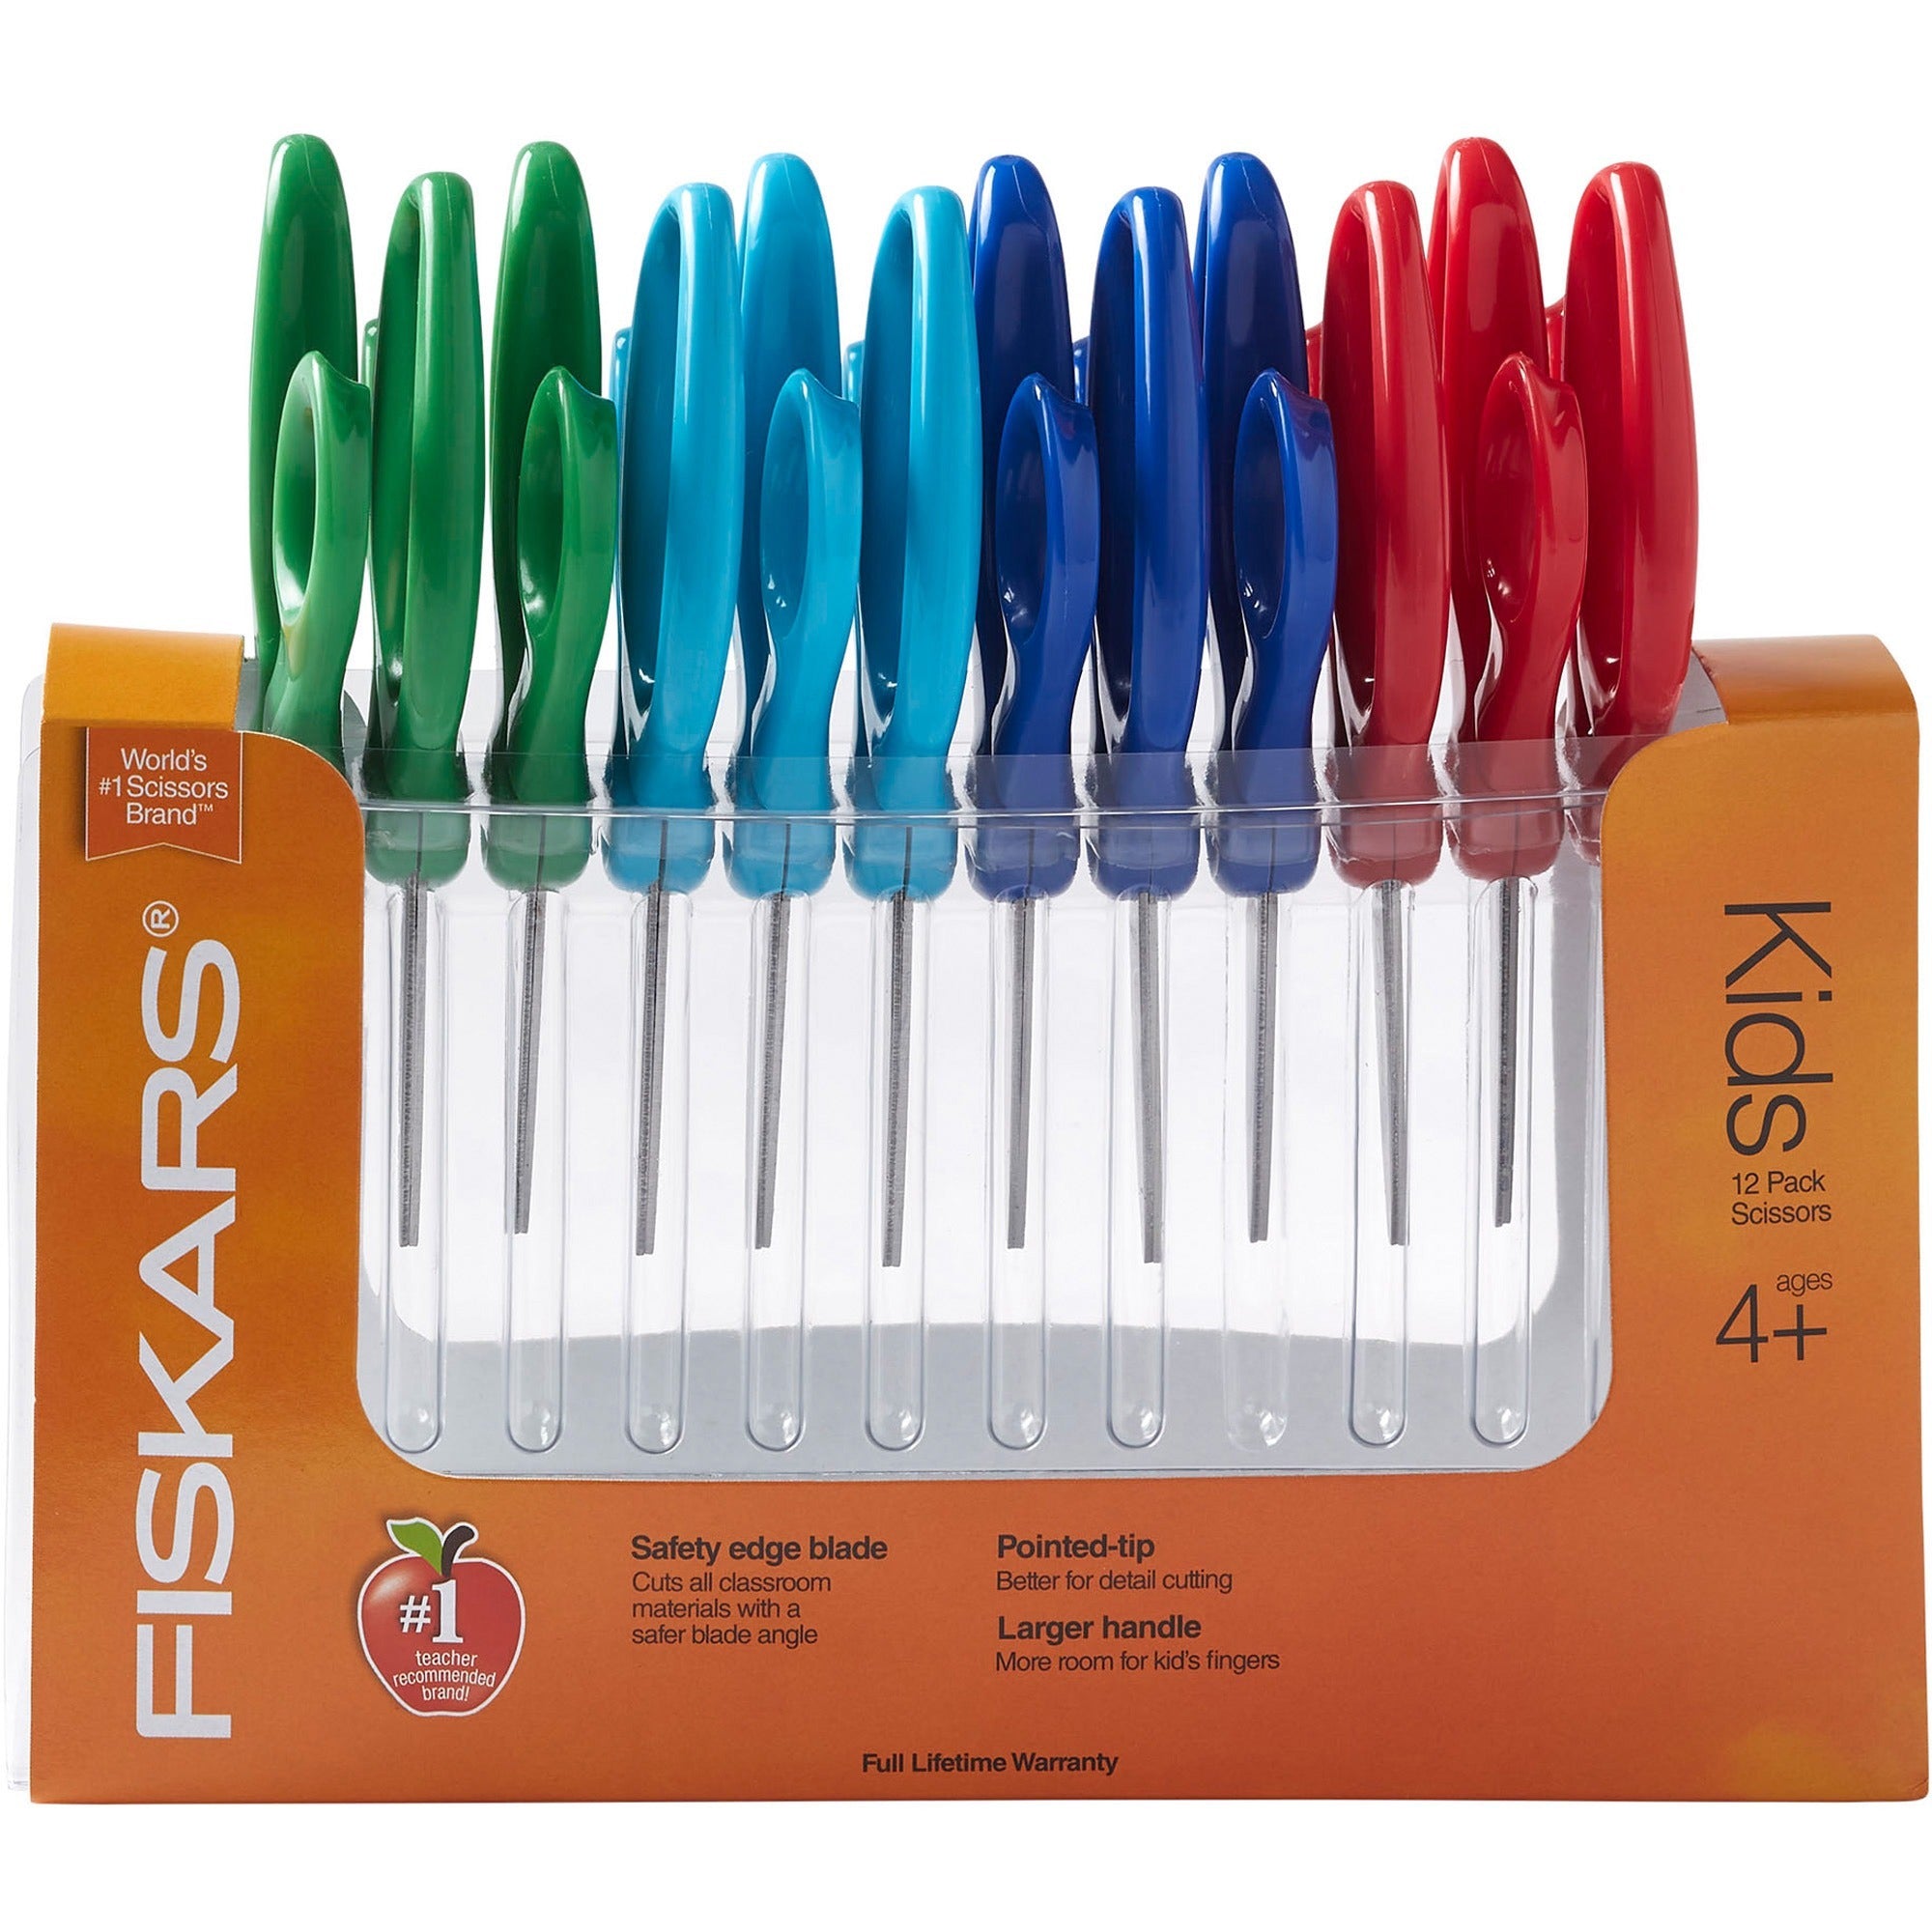 fiskars-5-blunt-tip-kids-scissors-175-cutting-length-5-overall-length-straight-stainless-steel-safety-edge-blade-blunted-tip-red-blue-turquoise-green-12-pack_fsk1941601070 - 2